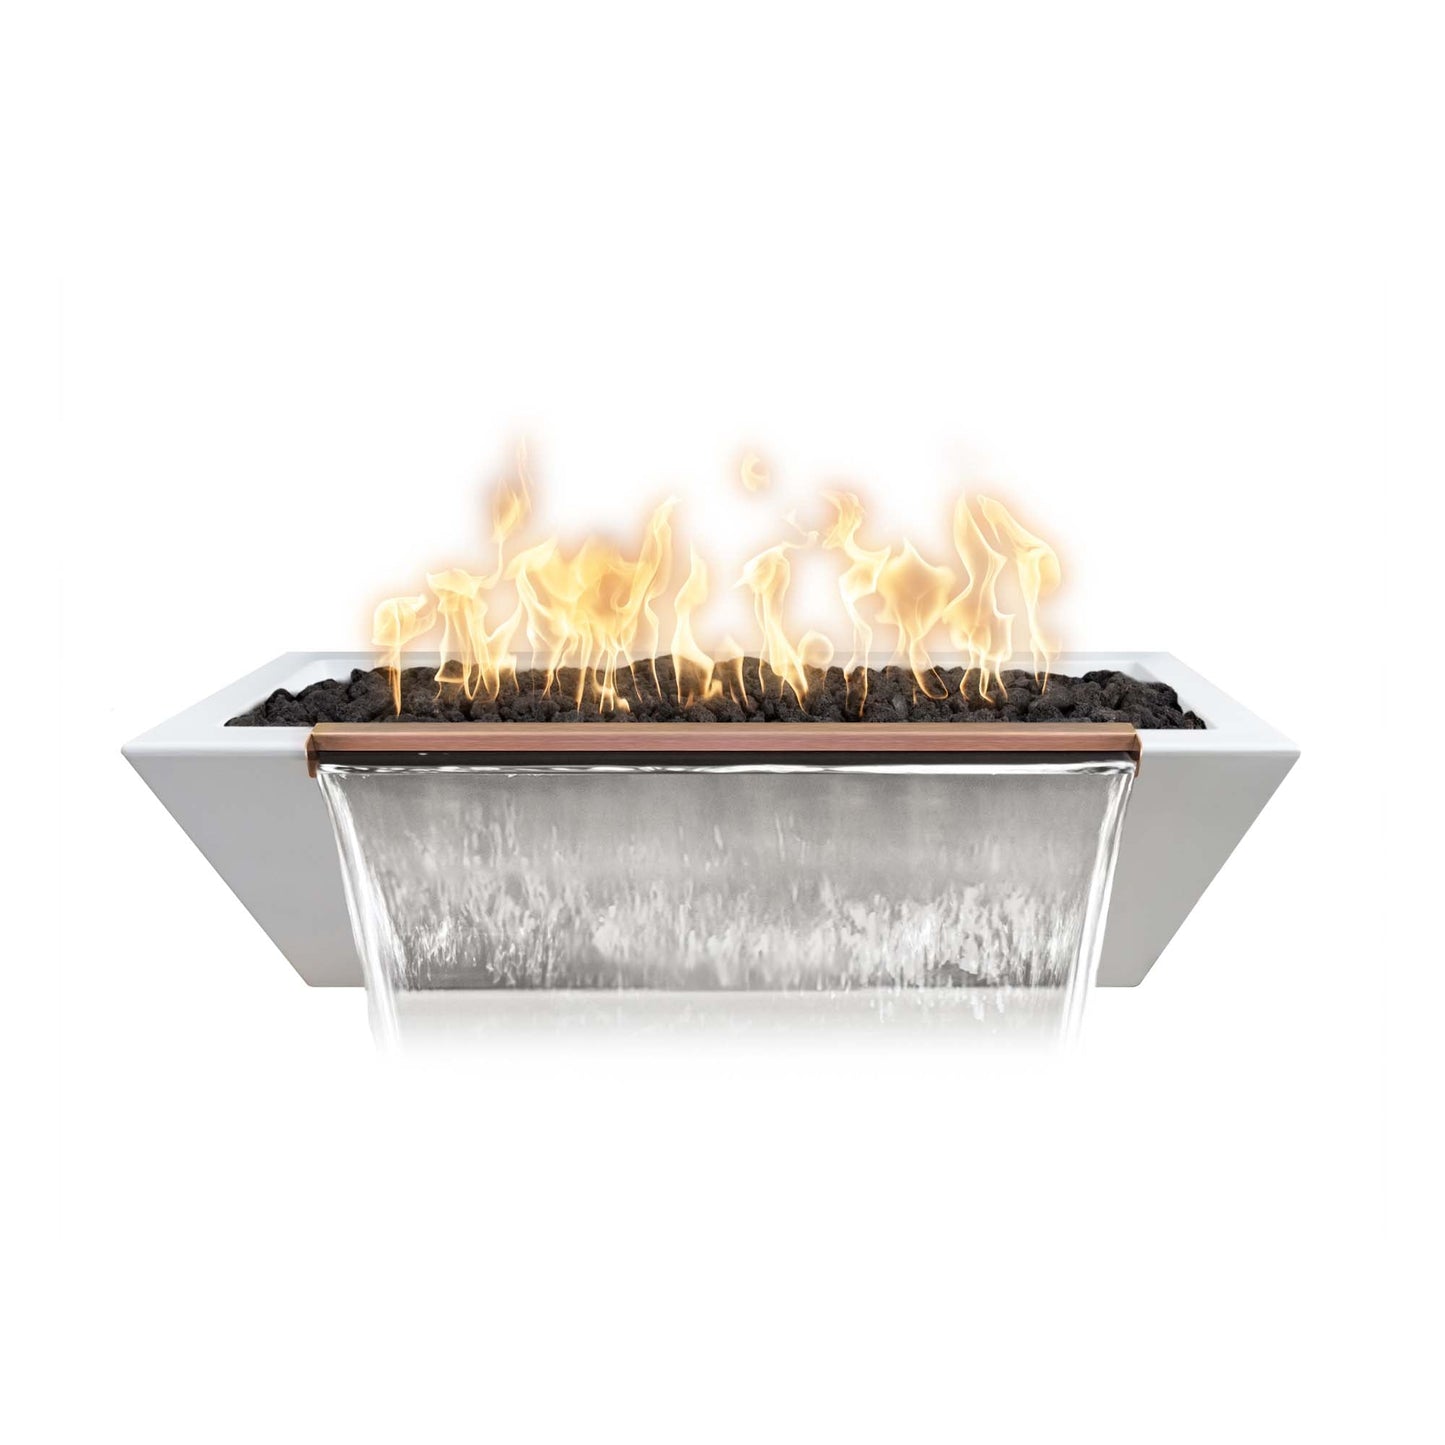 The Outdoor Plus Linear Maya 72" Black GFRC Concrete Natural Gas Fire & Water Bowl with Match Lit Ignition